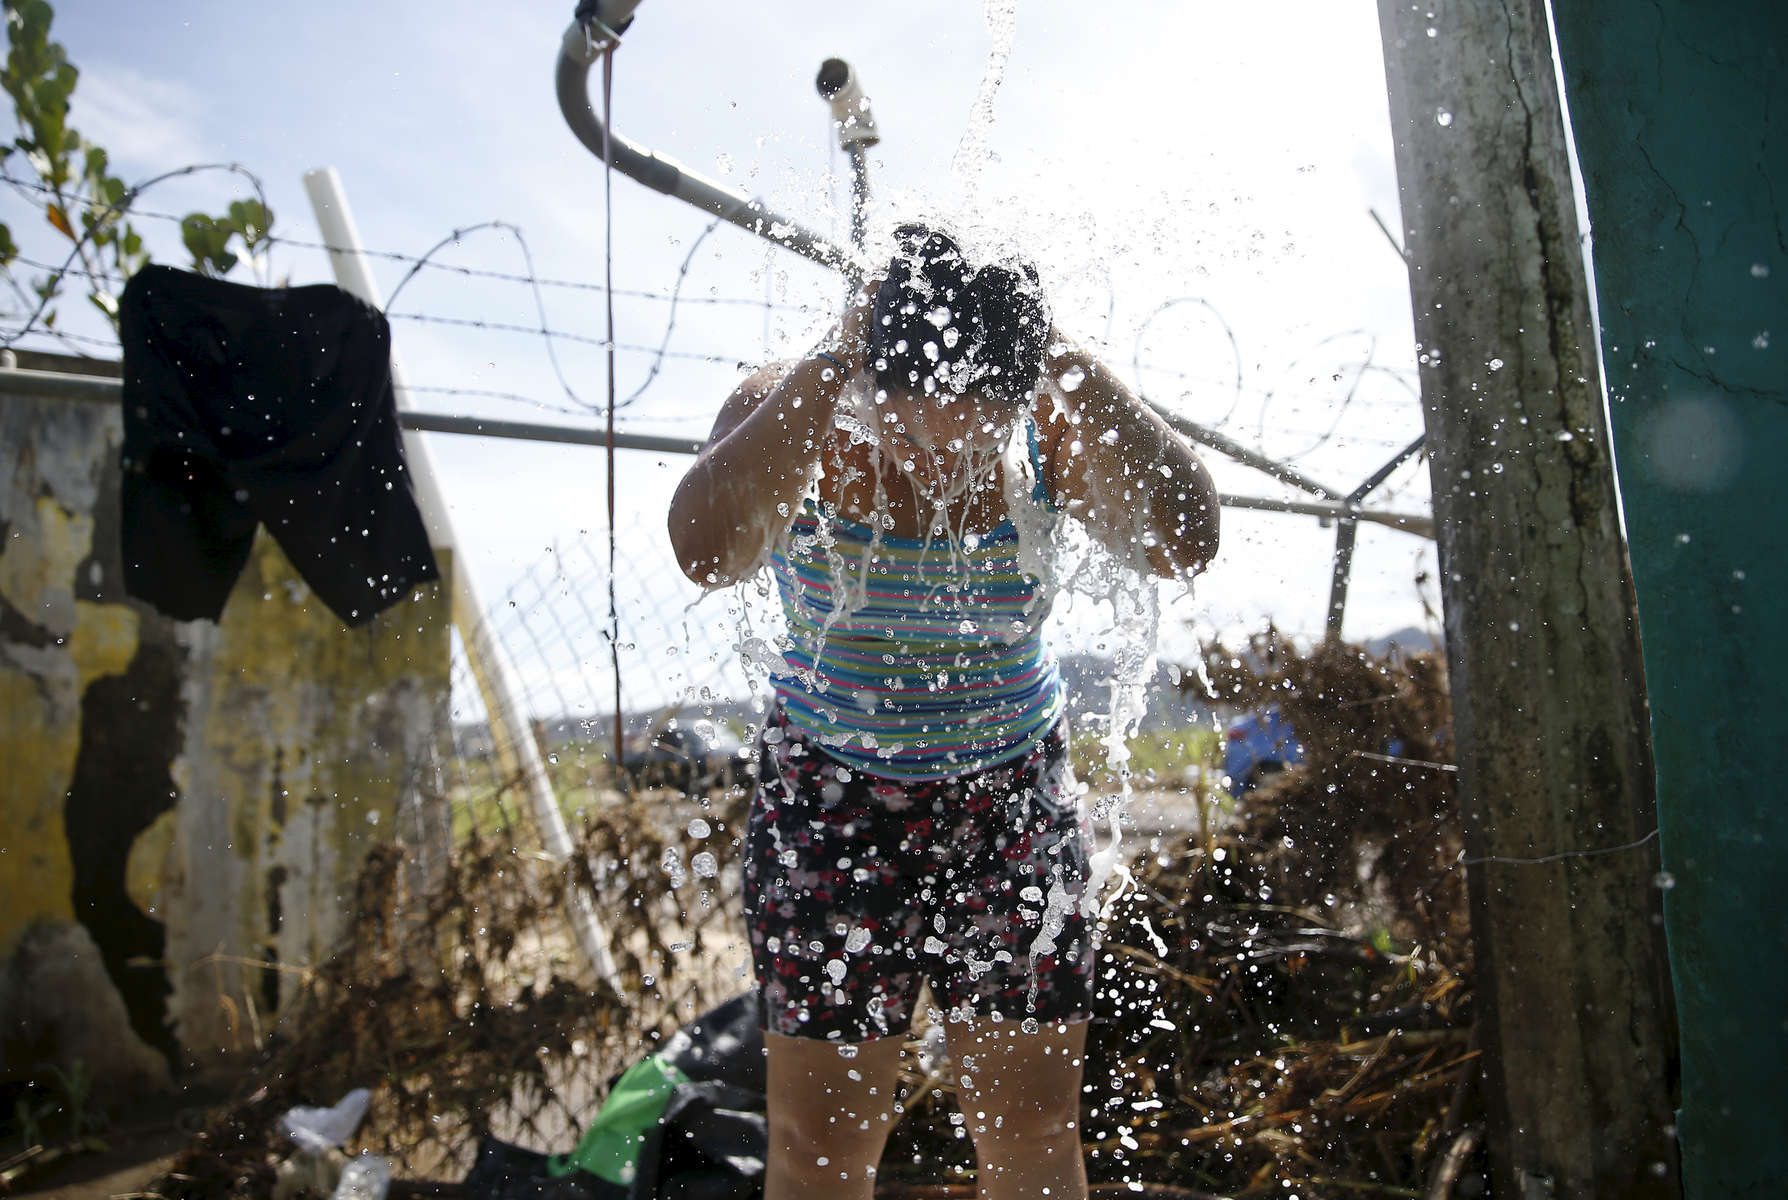 Arecibo, Puerto Rico -- 10/01/2017 -  With aid and supplies slow to come to this corner to the island, scores of residents in Arecibo like Deborah Estremera, came to bathe and wash their clothes in one of the few available spigots of fresh water here. They knew it was unsafe to drink but still filled jugs so that they could flush toilets and clean their homes. 